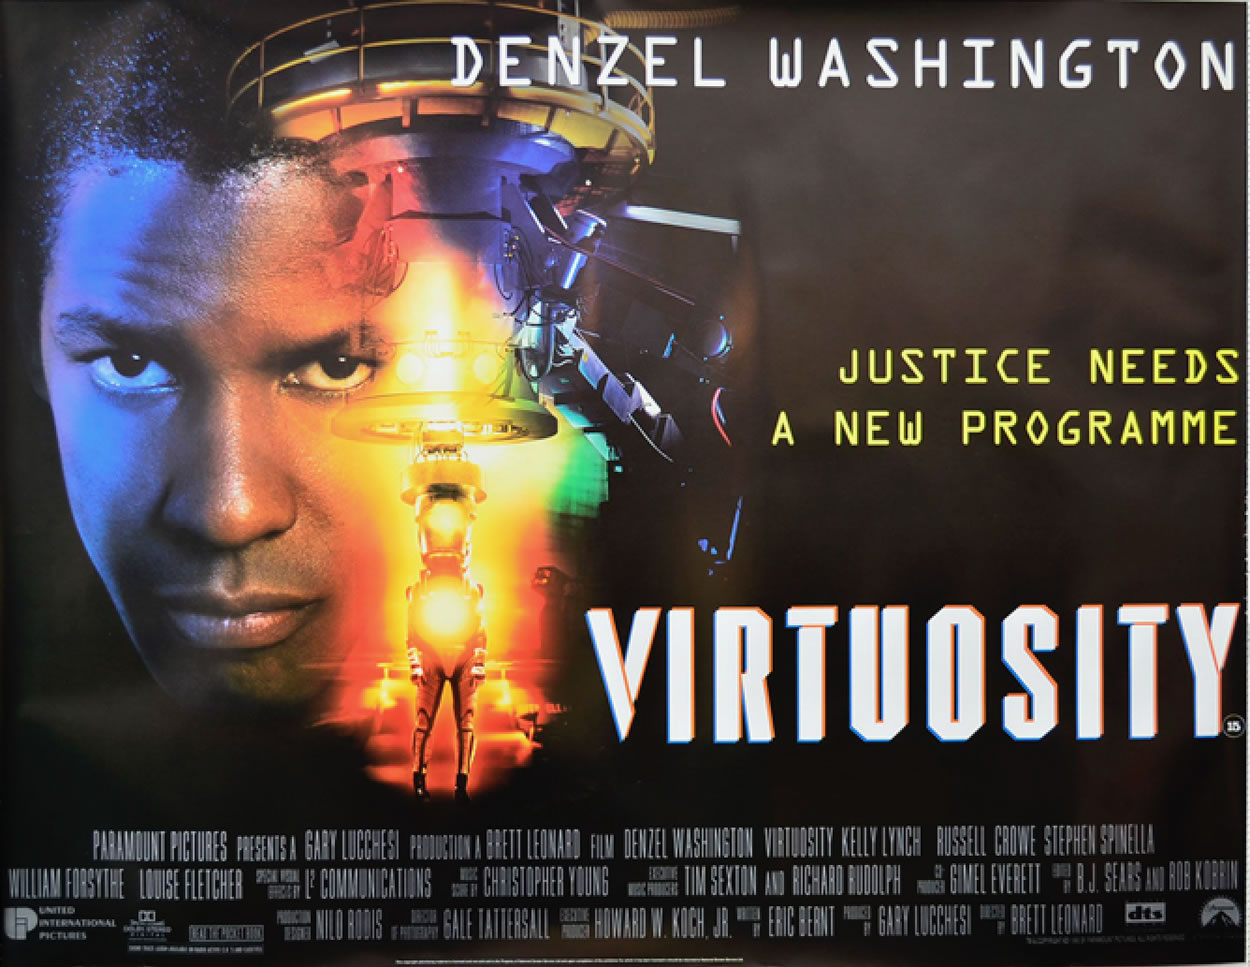 THE PRINCIPLES OF A VIRTUAL EXISTENCE | MEDITATIONS ON THE MOVIE IDENTITY: VIRTUOSITY